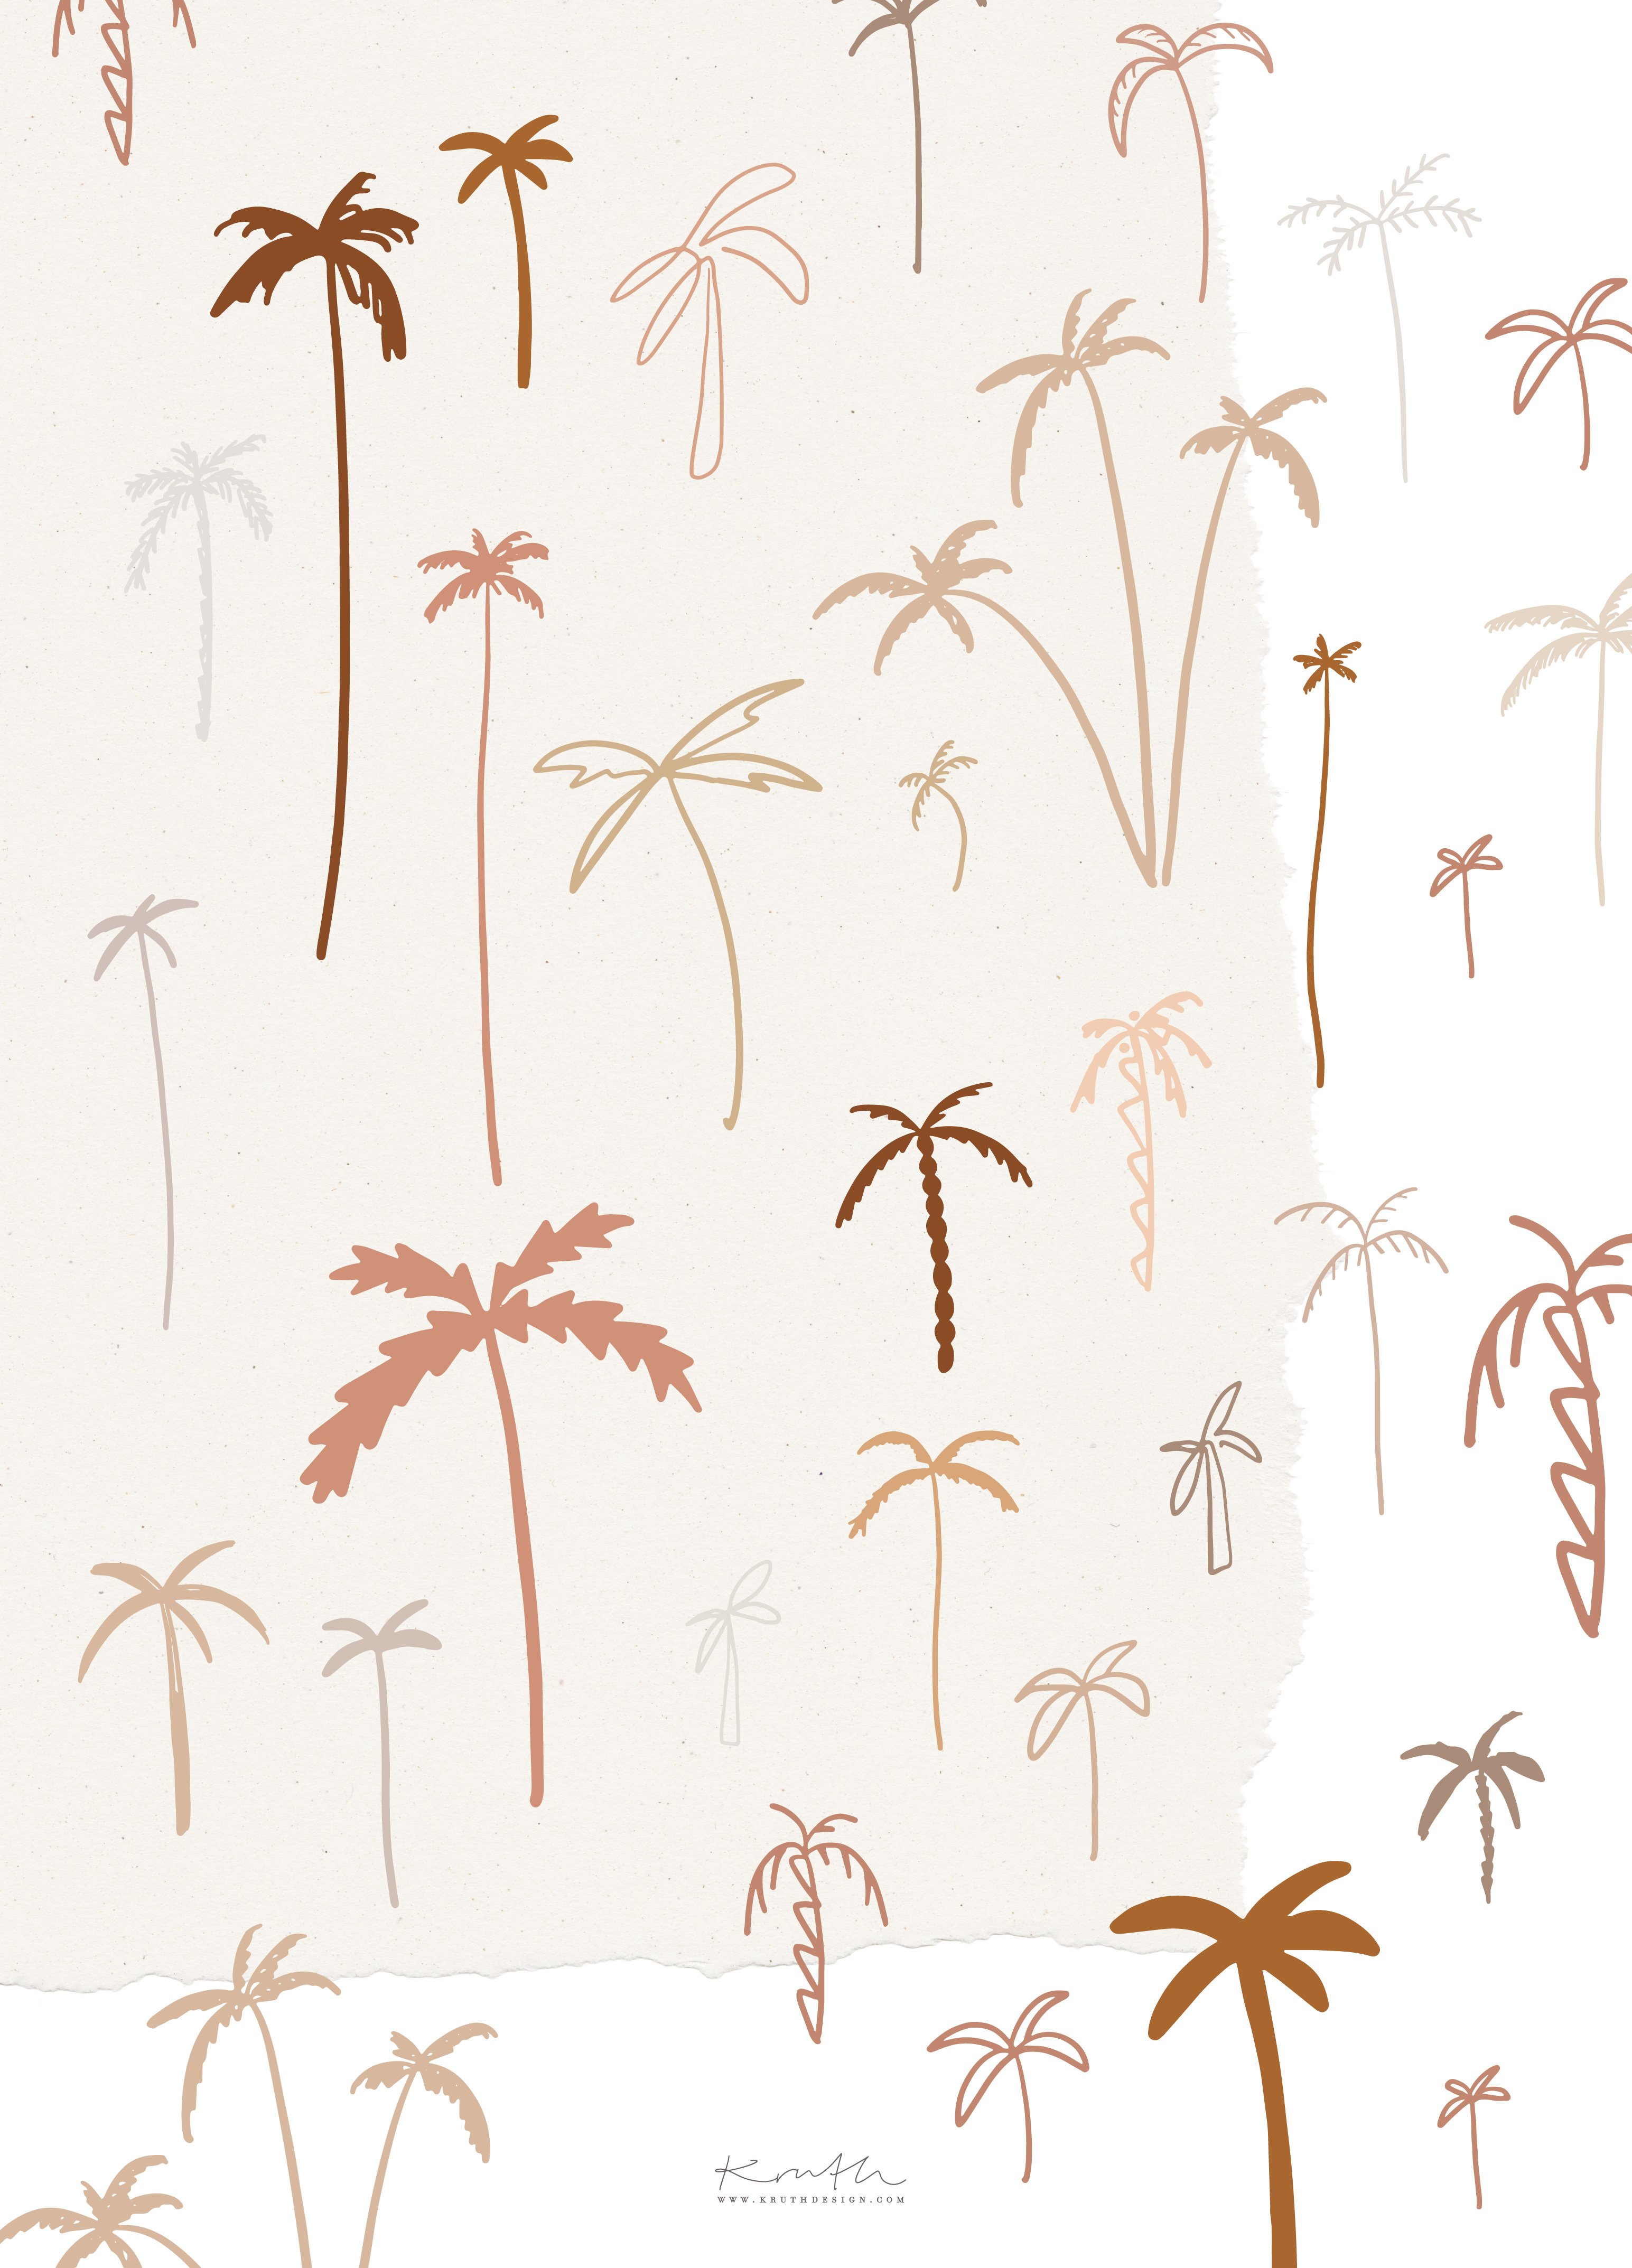 Picture of a bunch of palm trees.